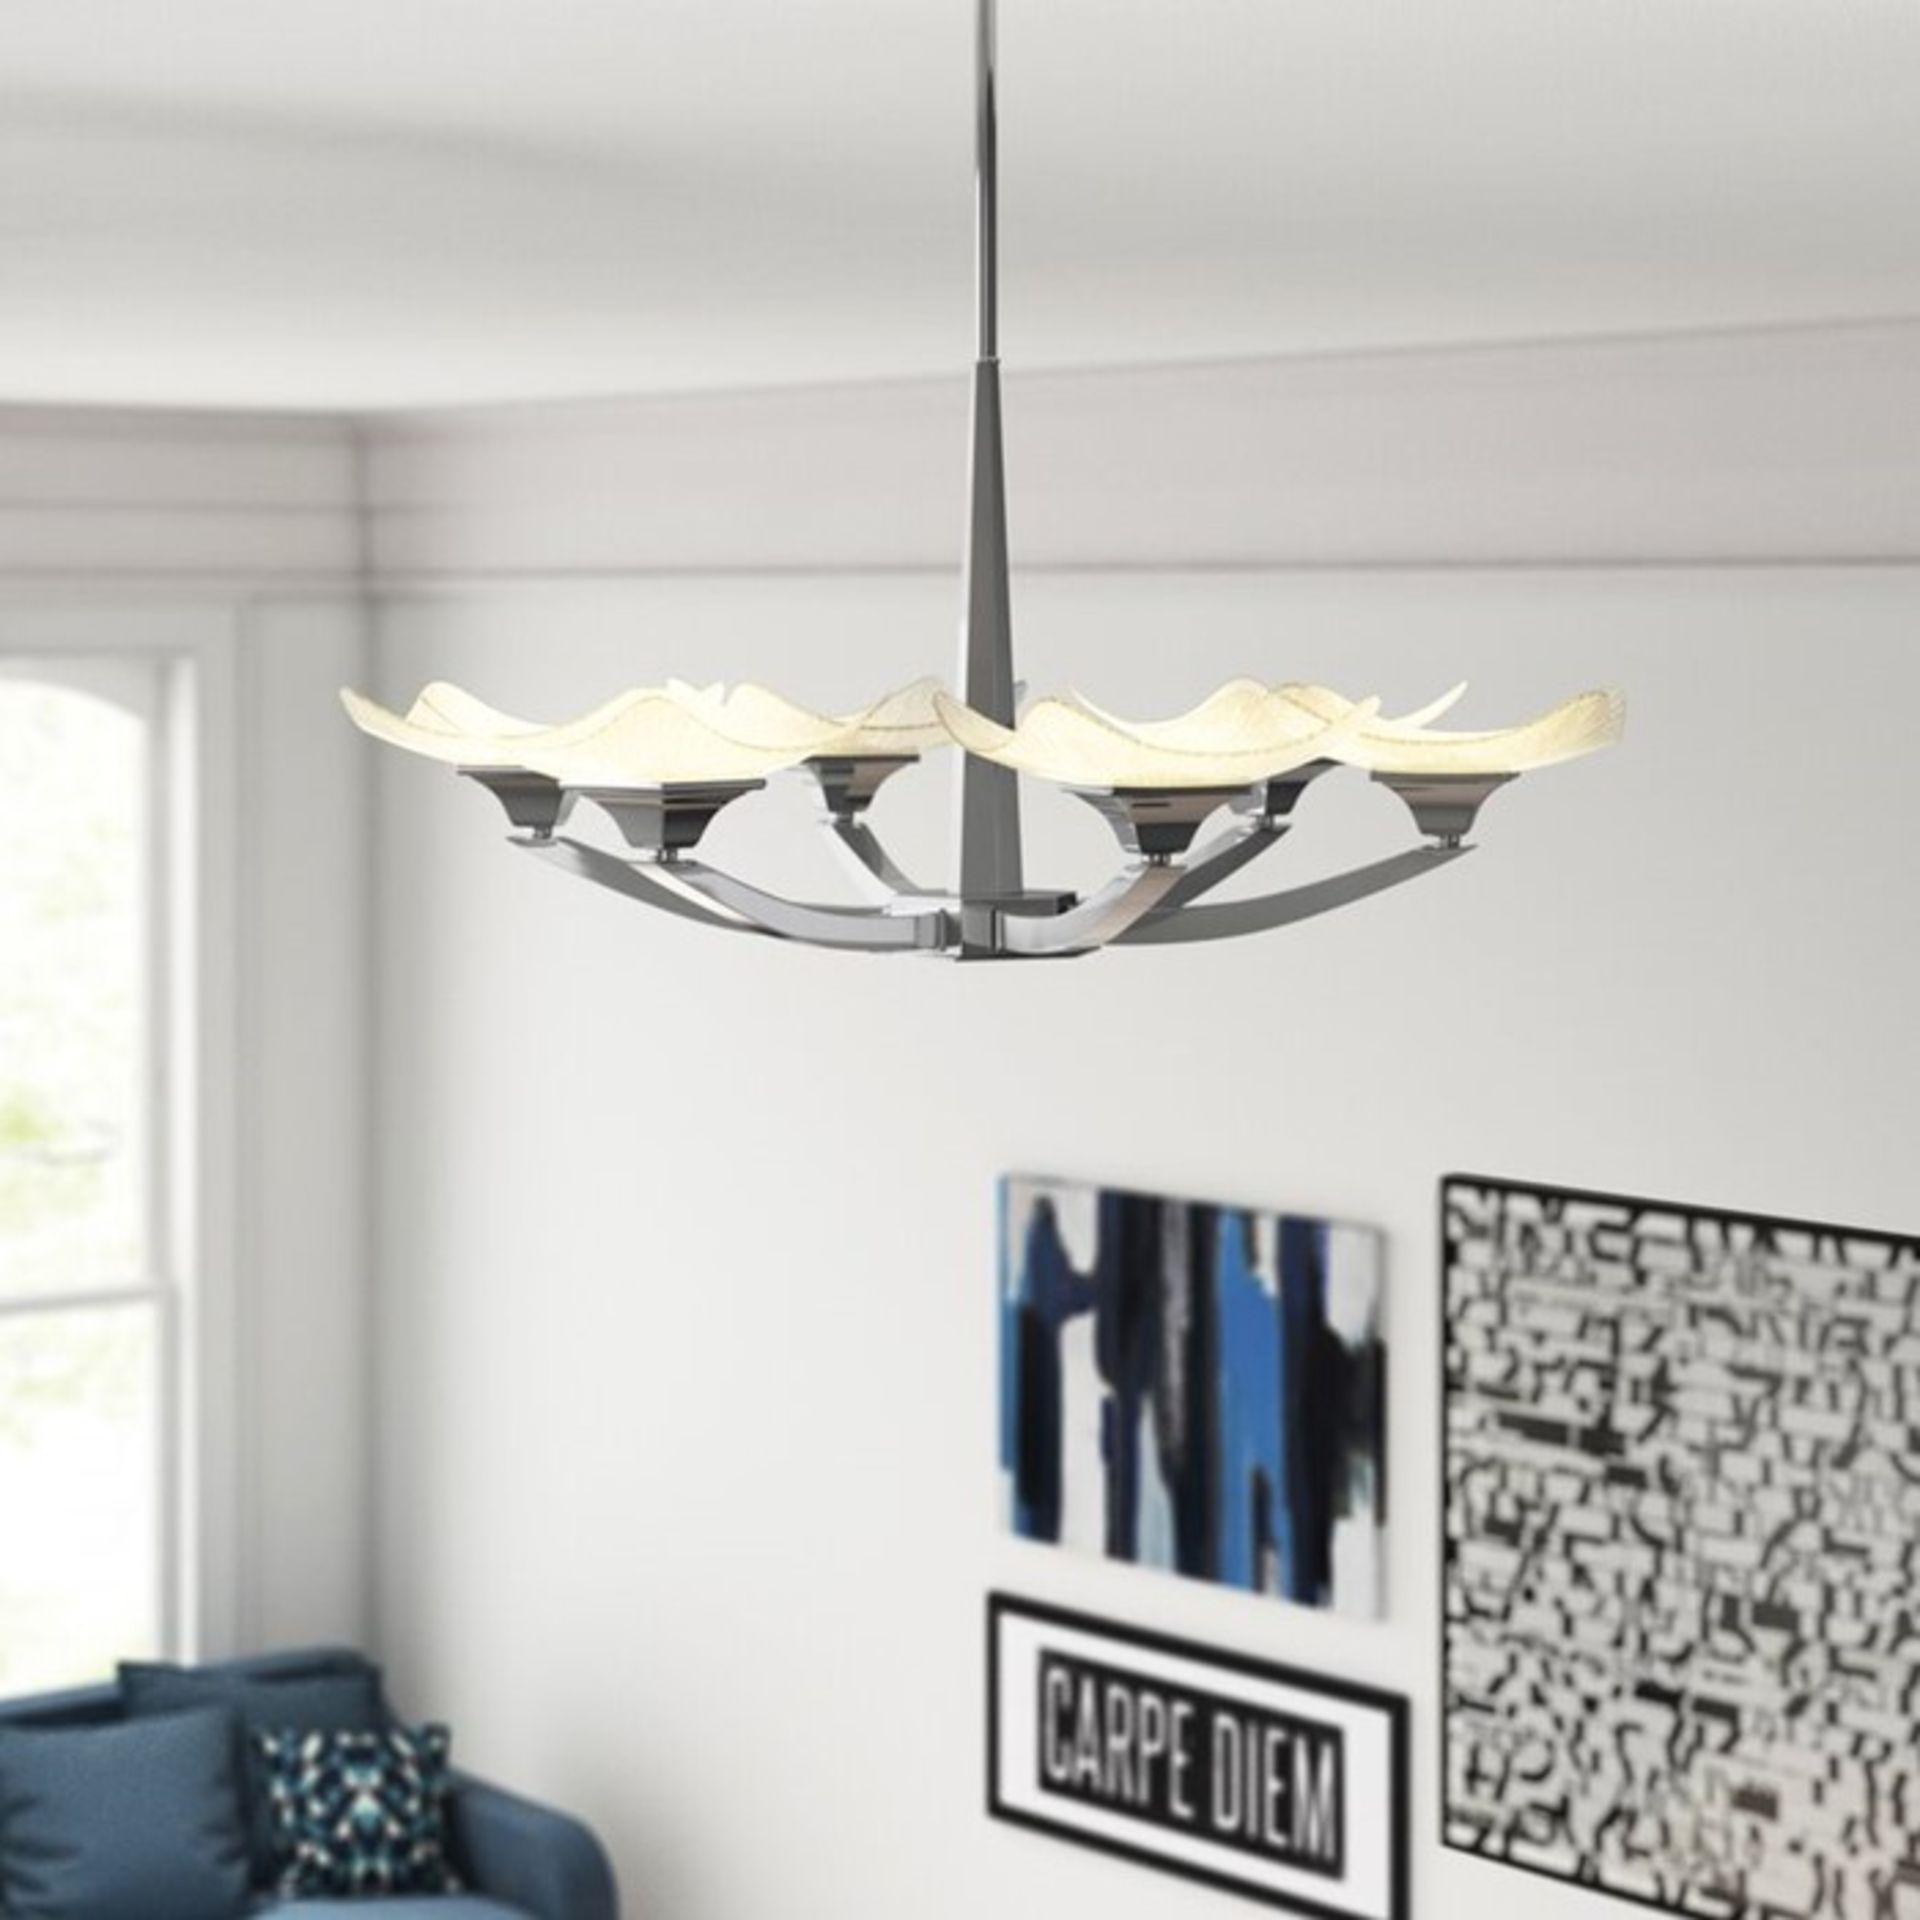 17 Stories, Ayres 6-Light Shaded Chandelier - RRP £133.99 (UEL3322 - 15312/10) 5F